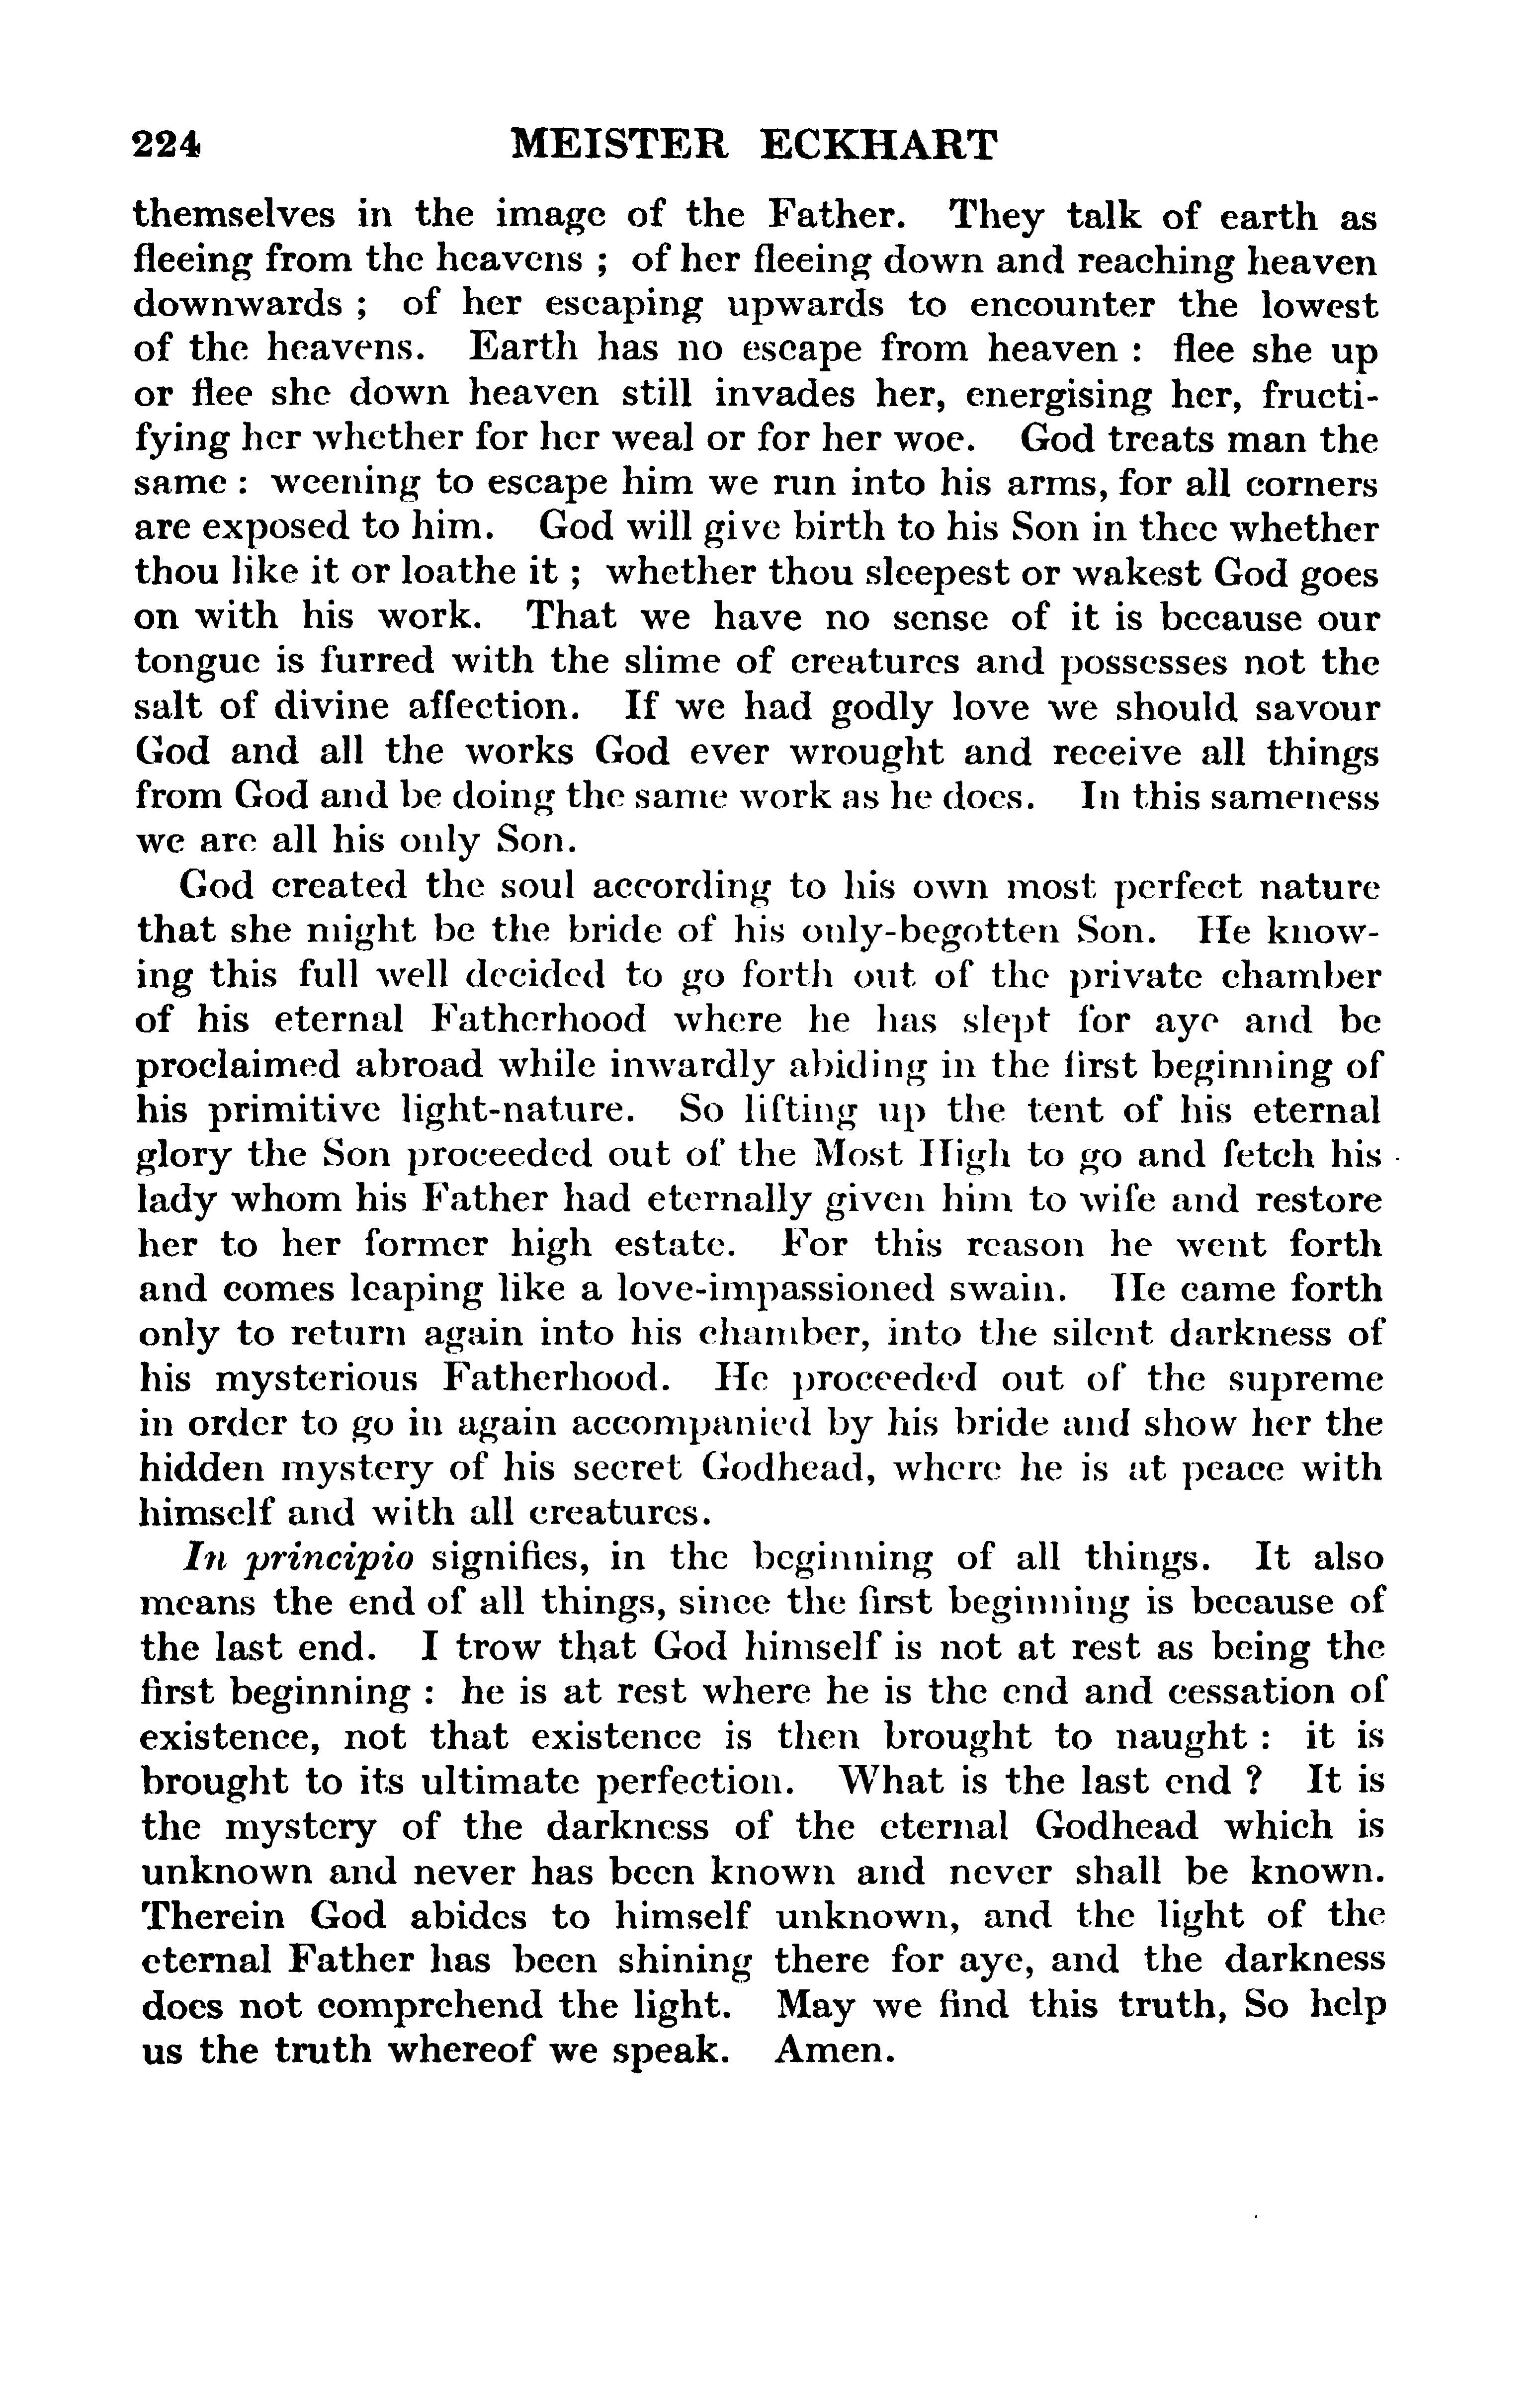 Image of page 0248